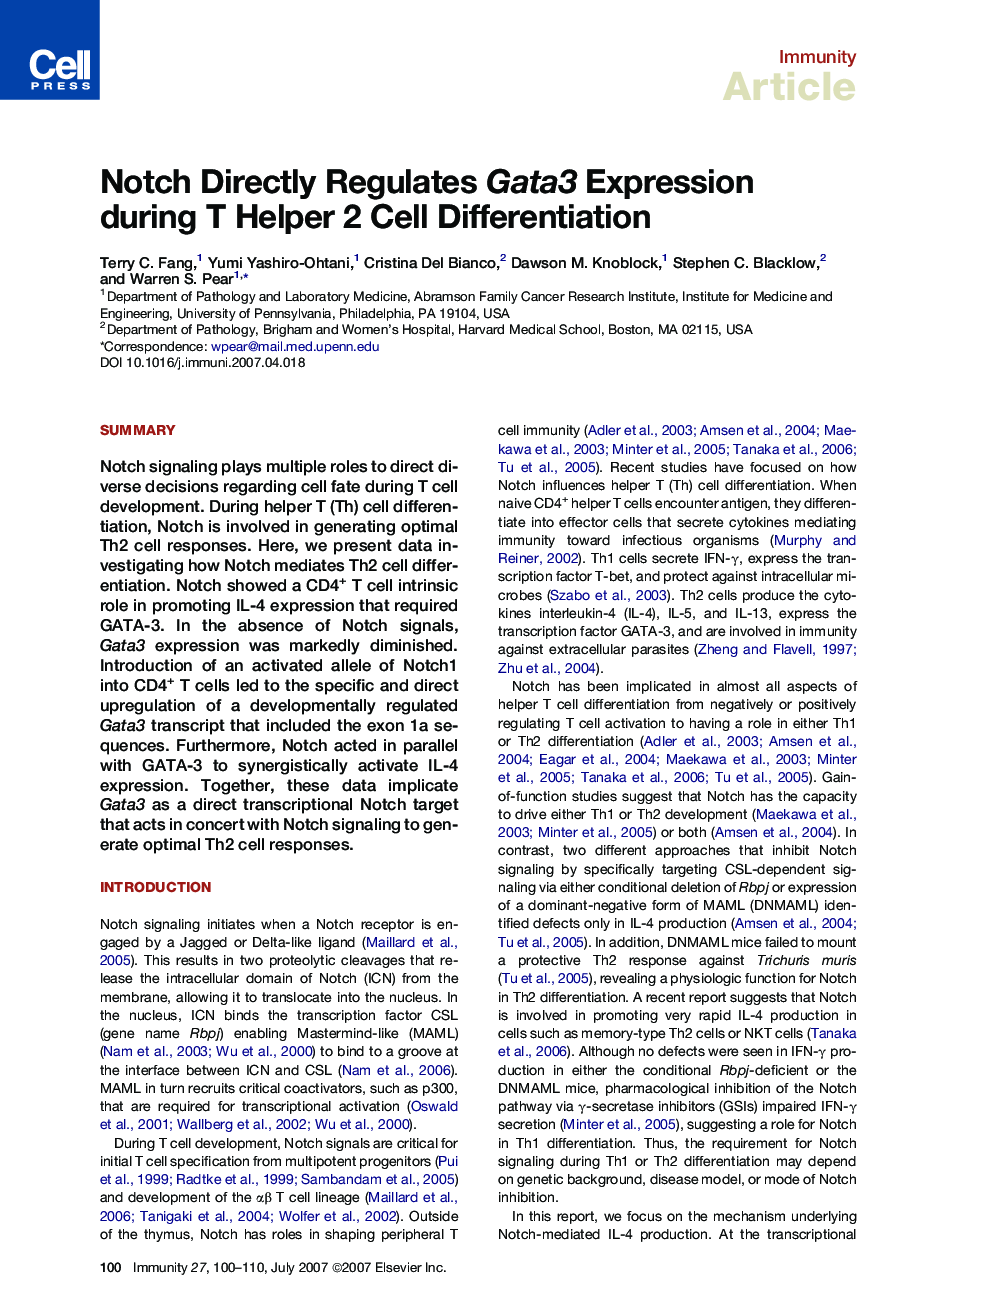 Notch Directly Regulates Gata3 Expression during T Helper 2 Cell Differentiation